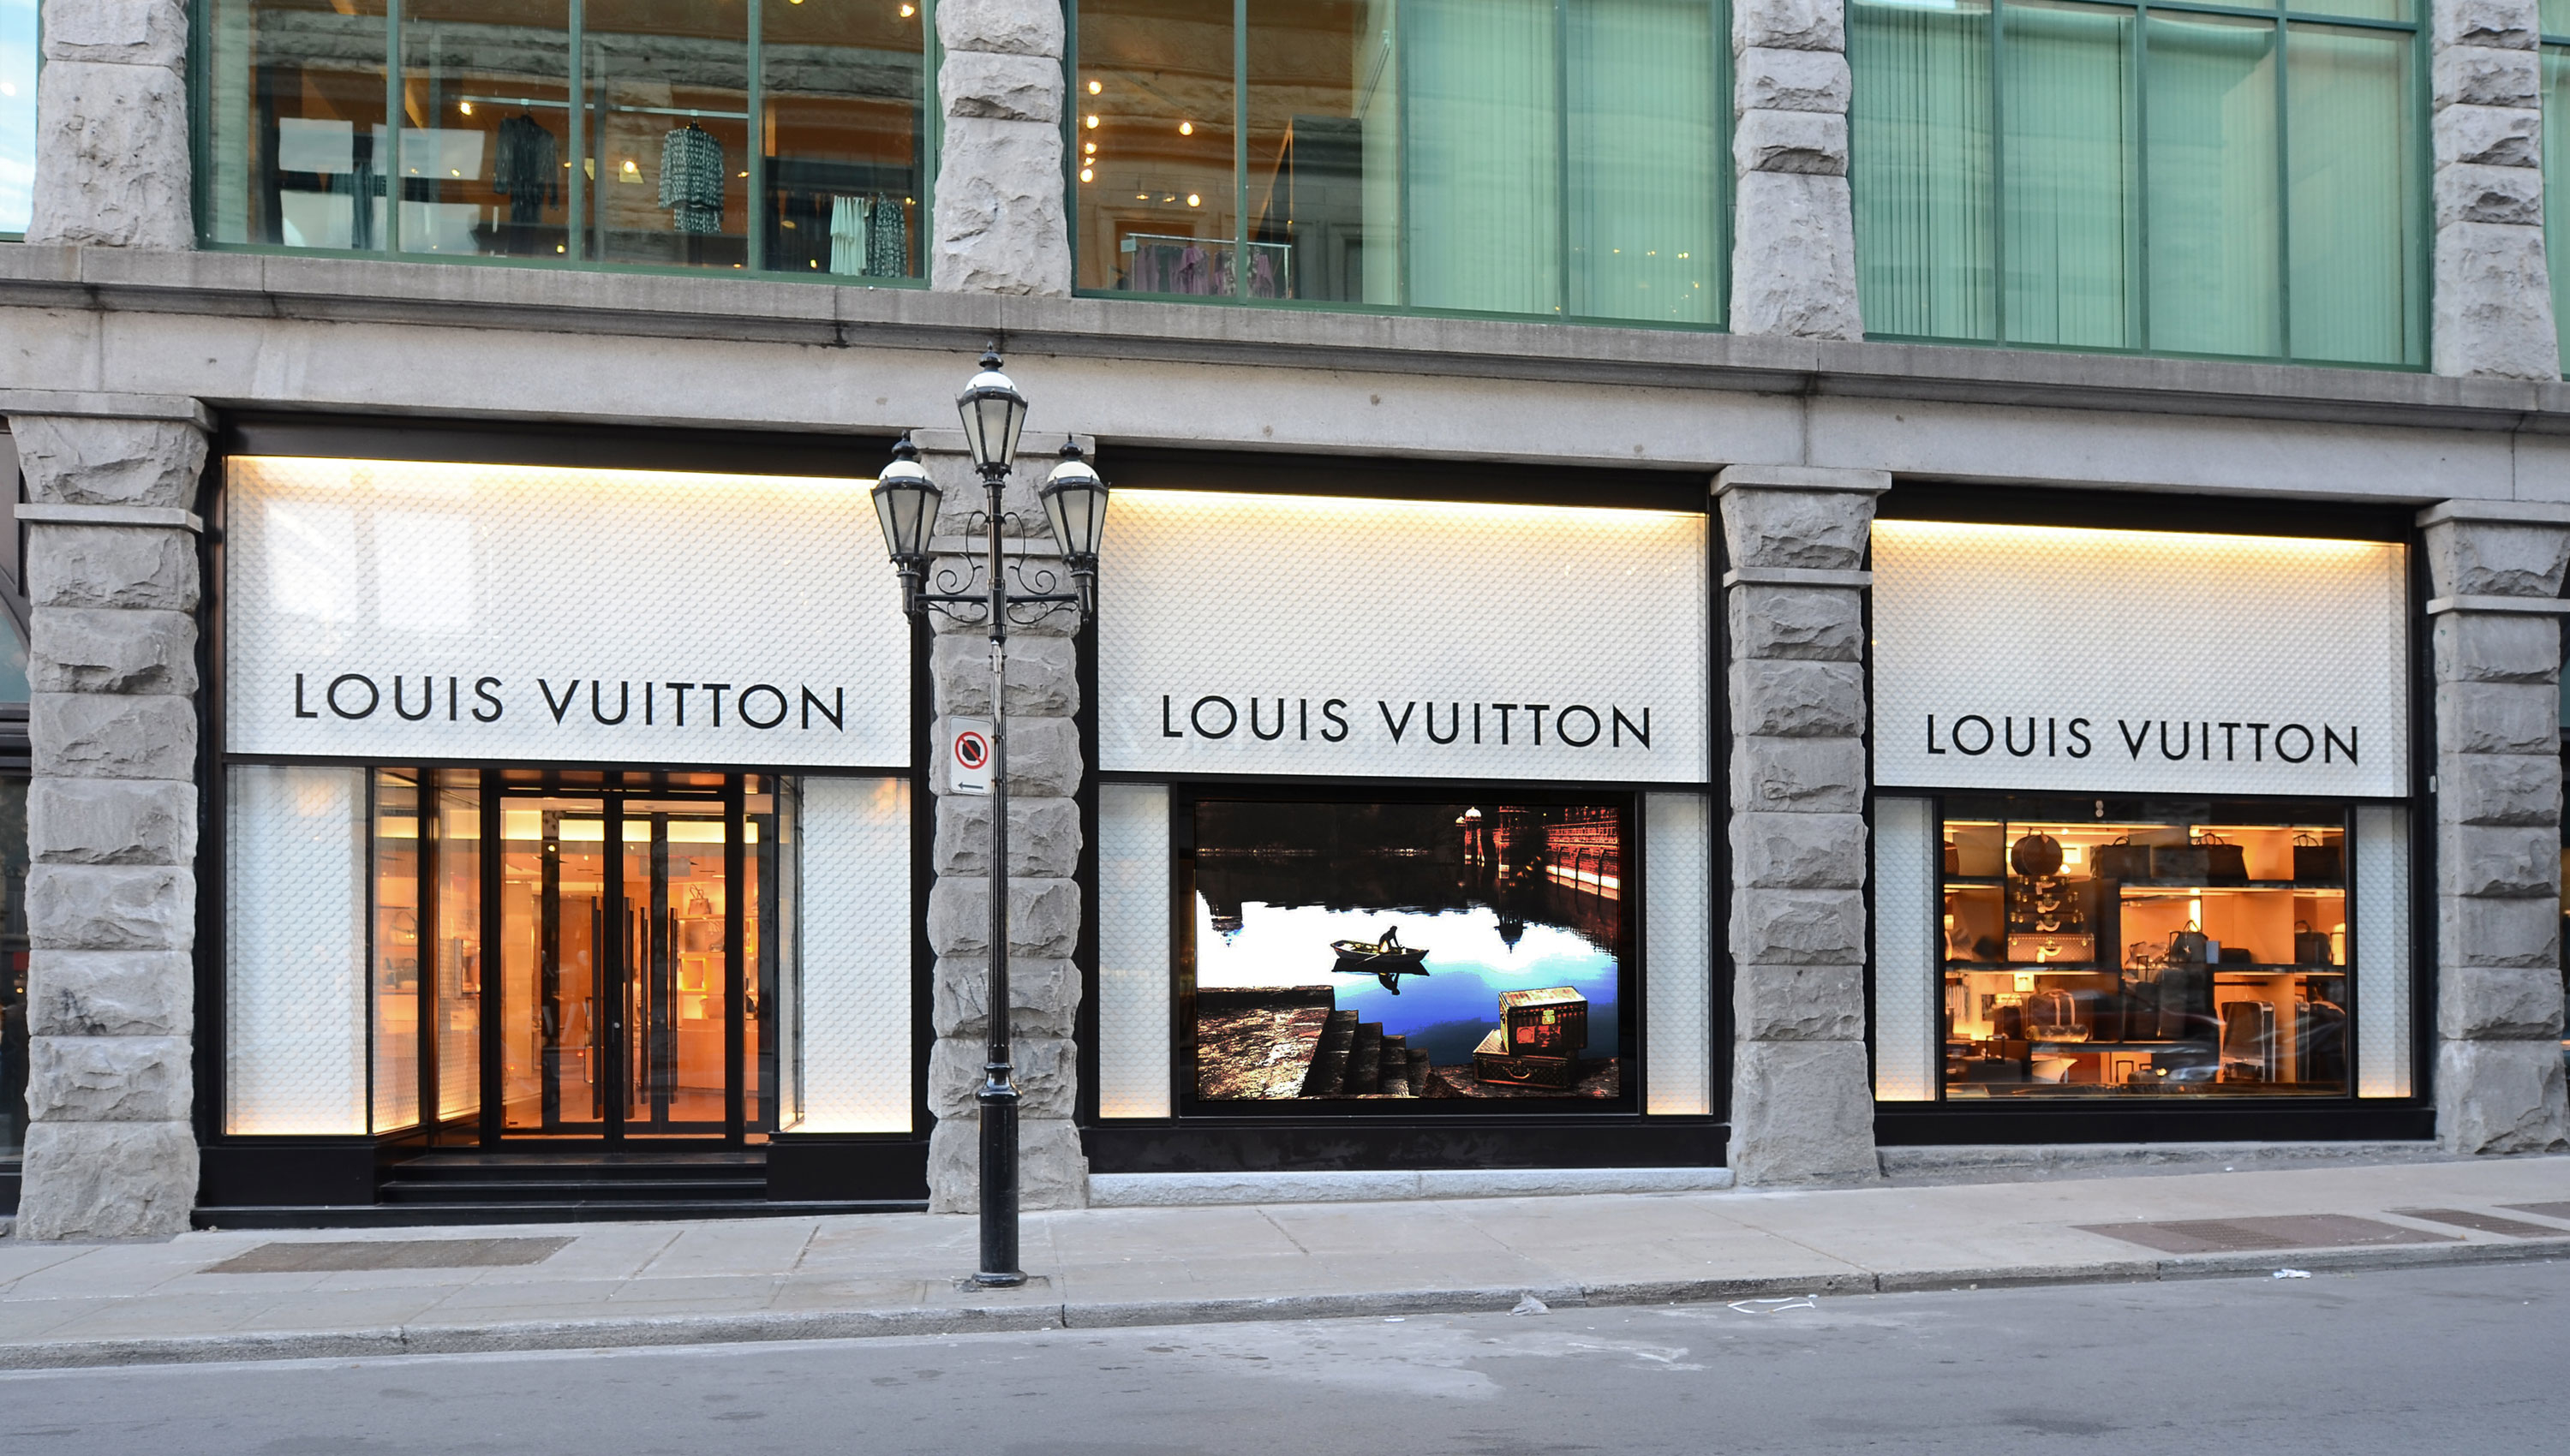 Louis Trainers Vuitton LV Shoes on sale for Sale in Ontario, CA